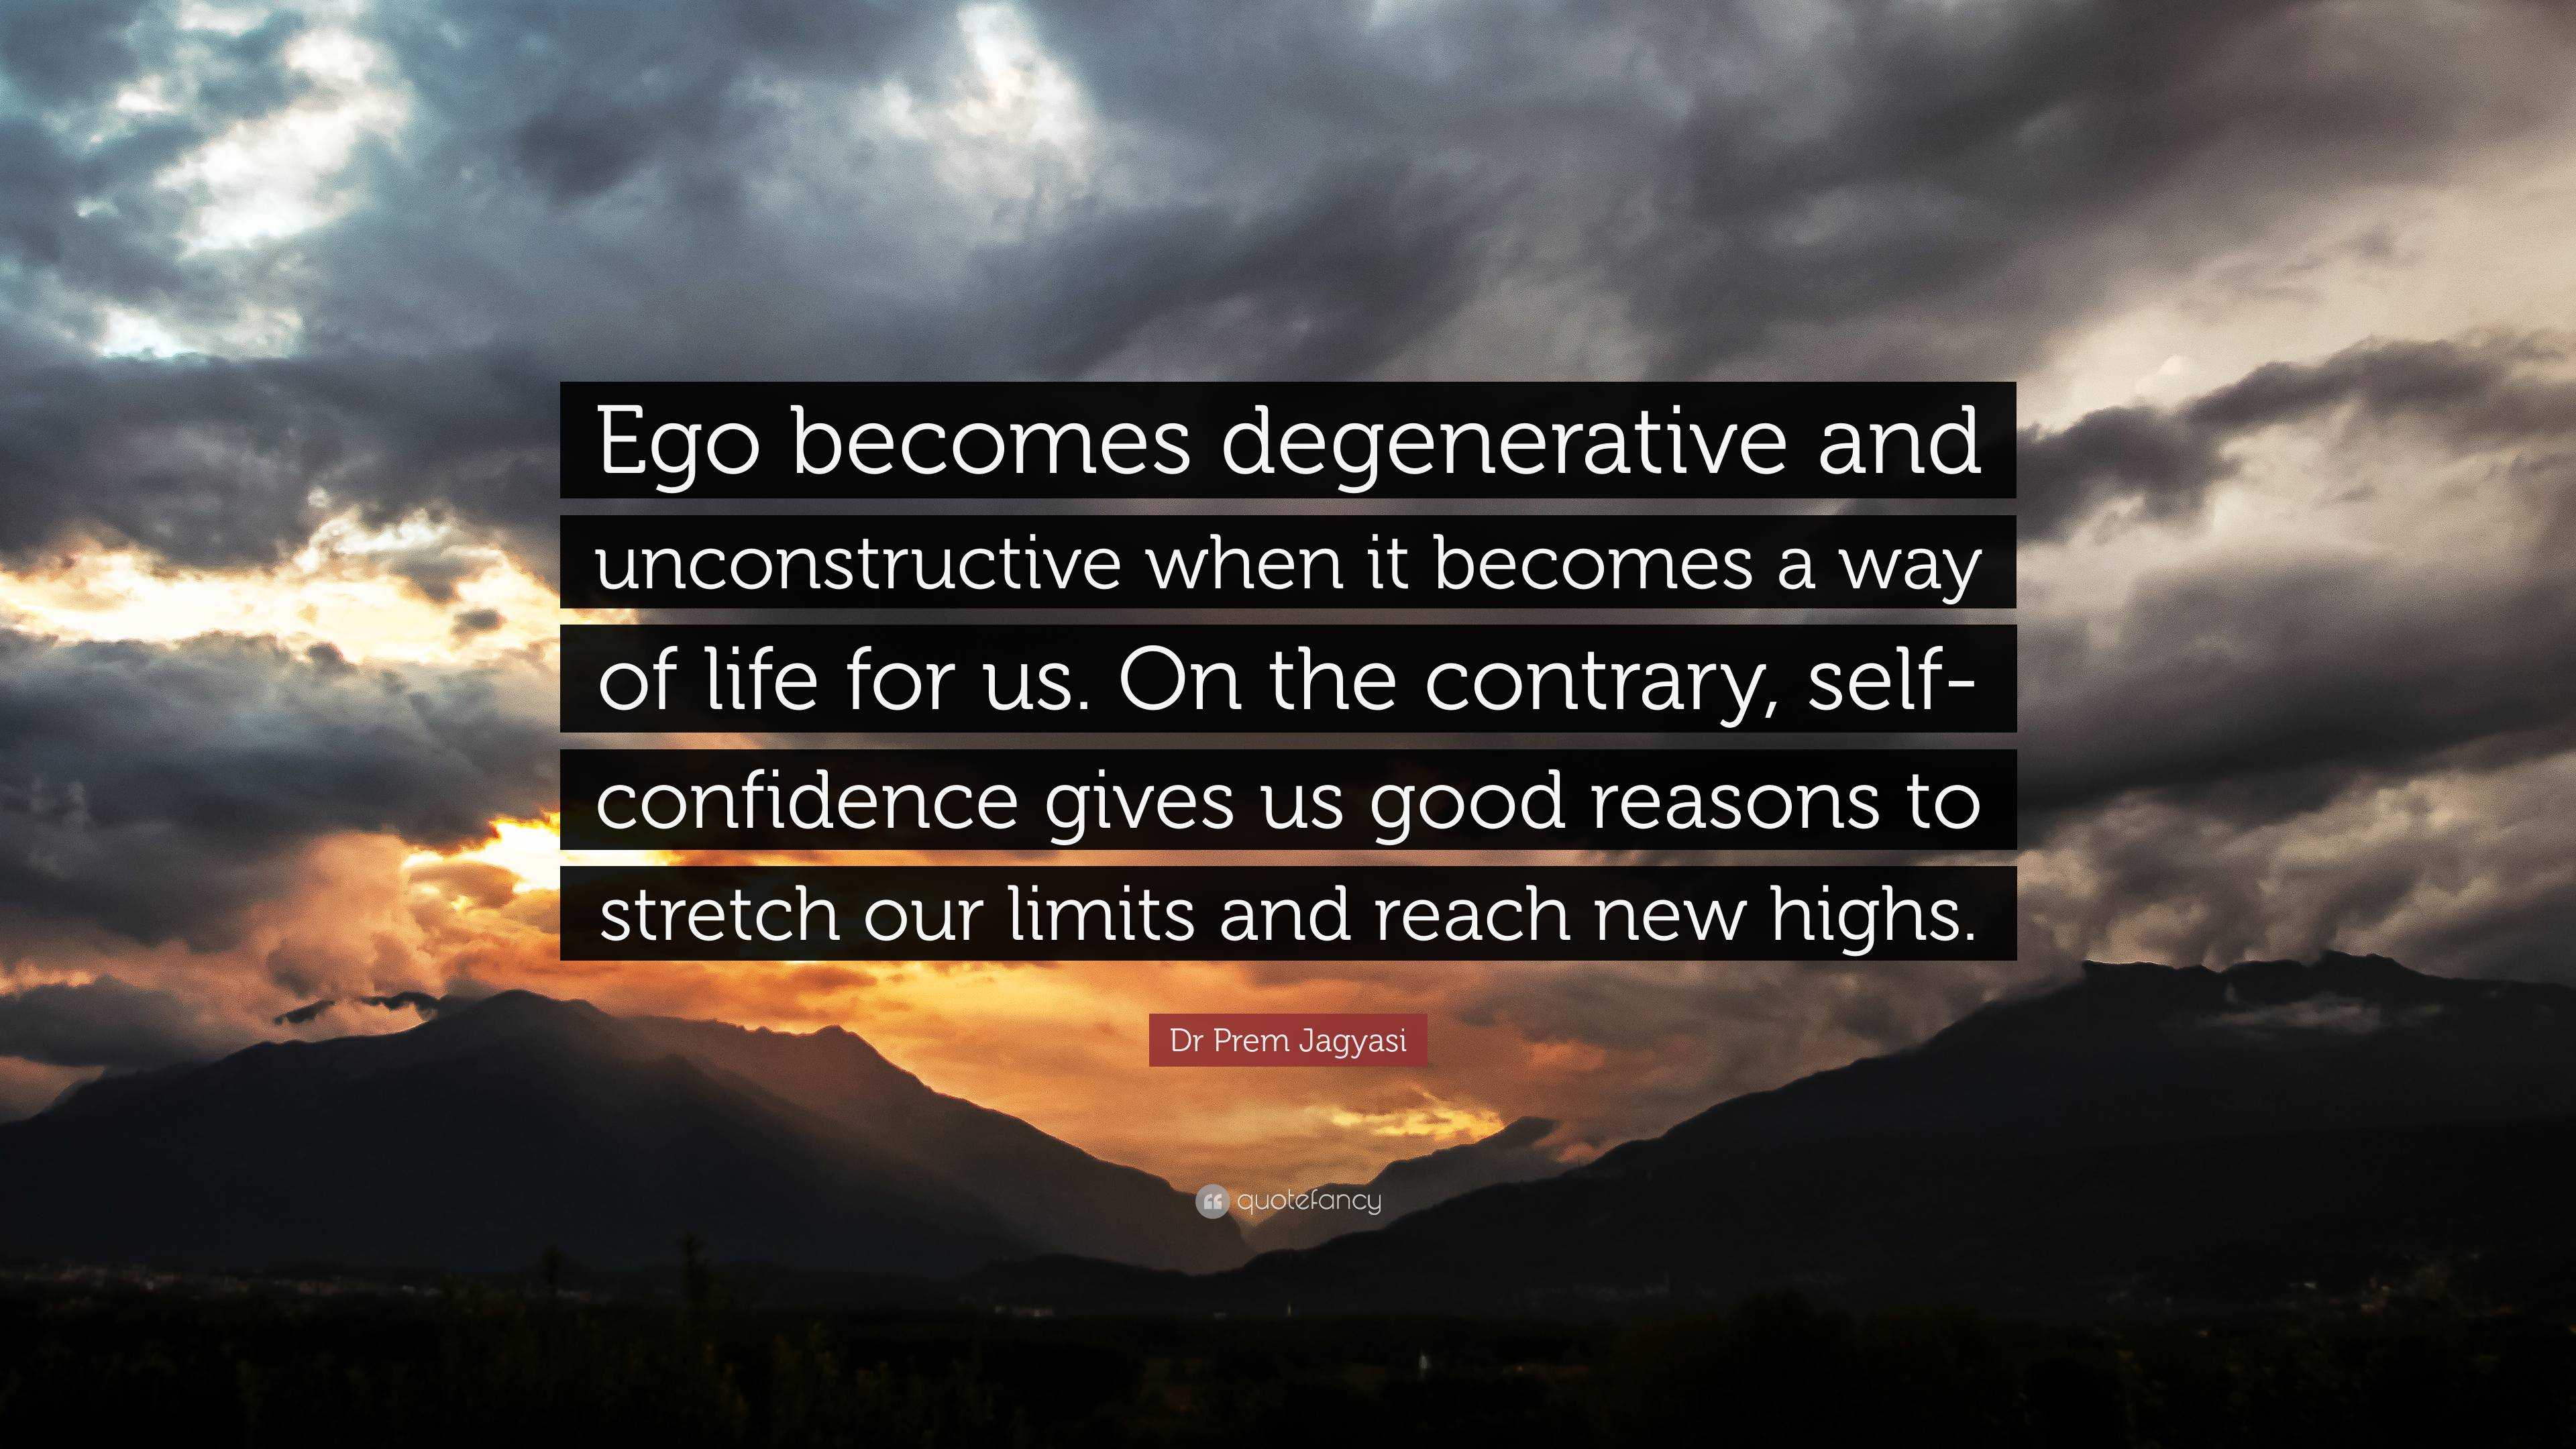 Dr Prem Jagyasi Quote: “Ego becomes degenerative and unconstructive when it  becomes a way of life for us. On the contrary, self-confidence gives...”